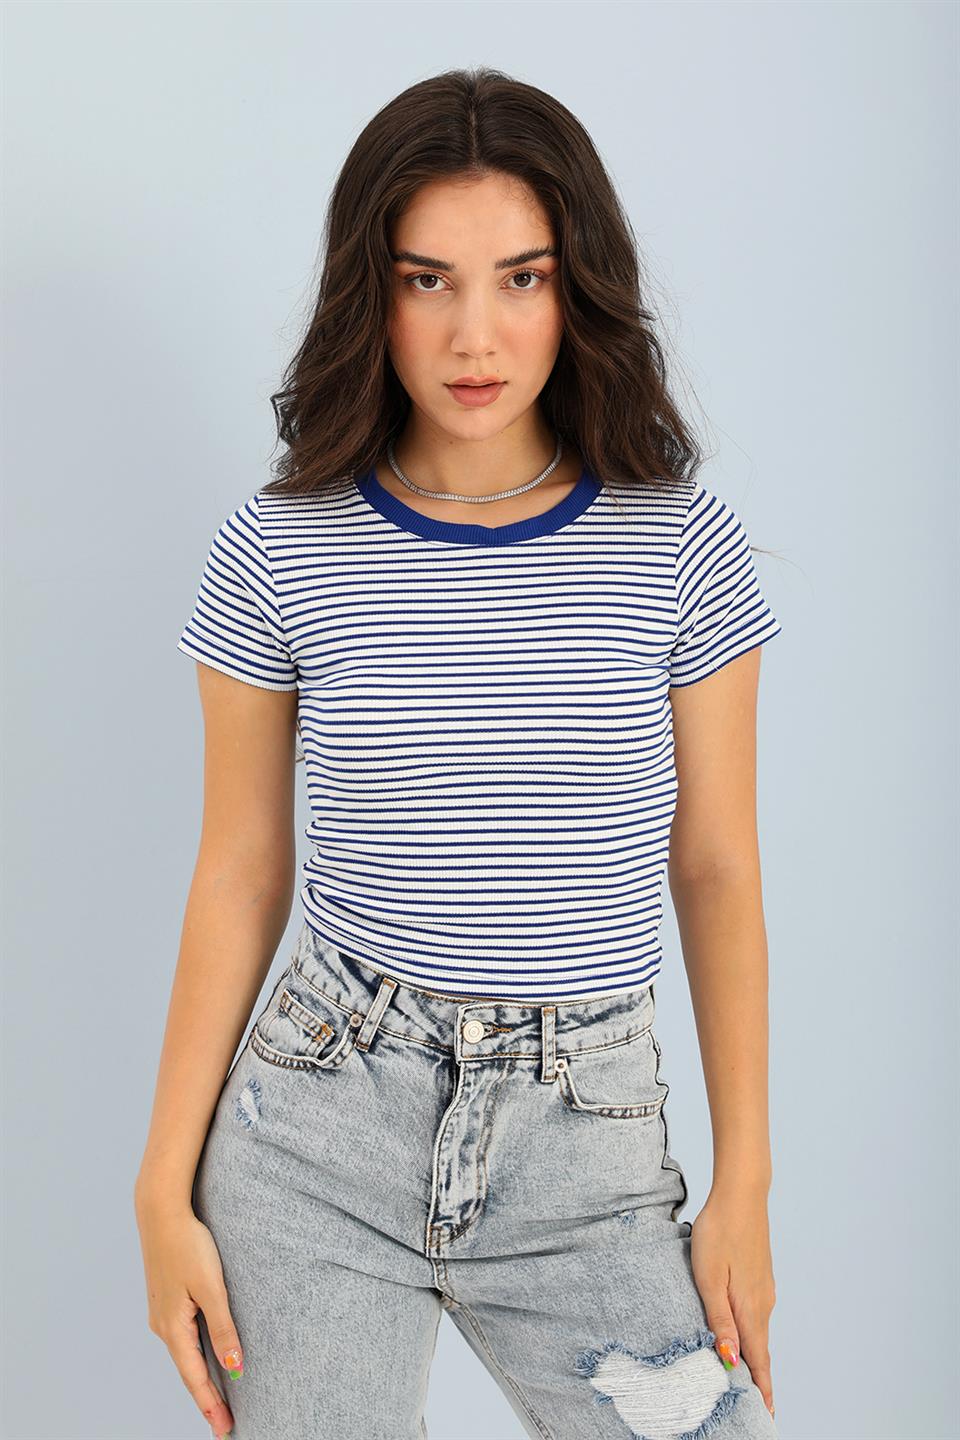 Women's Blouse Crew Neck Striped Camisole - Navy Blue - STREETMODE™